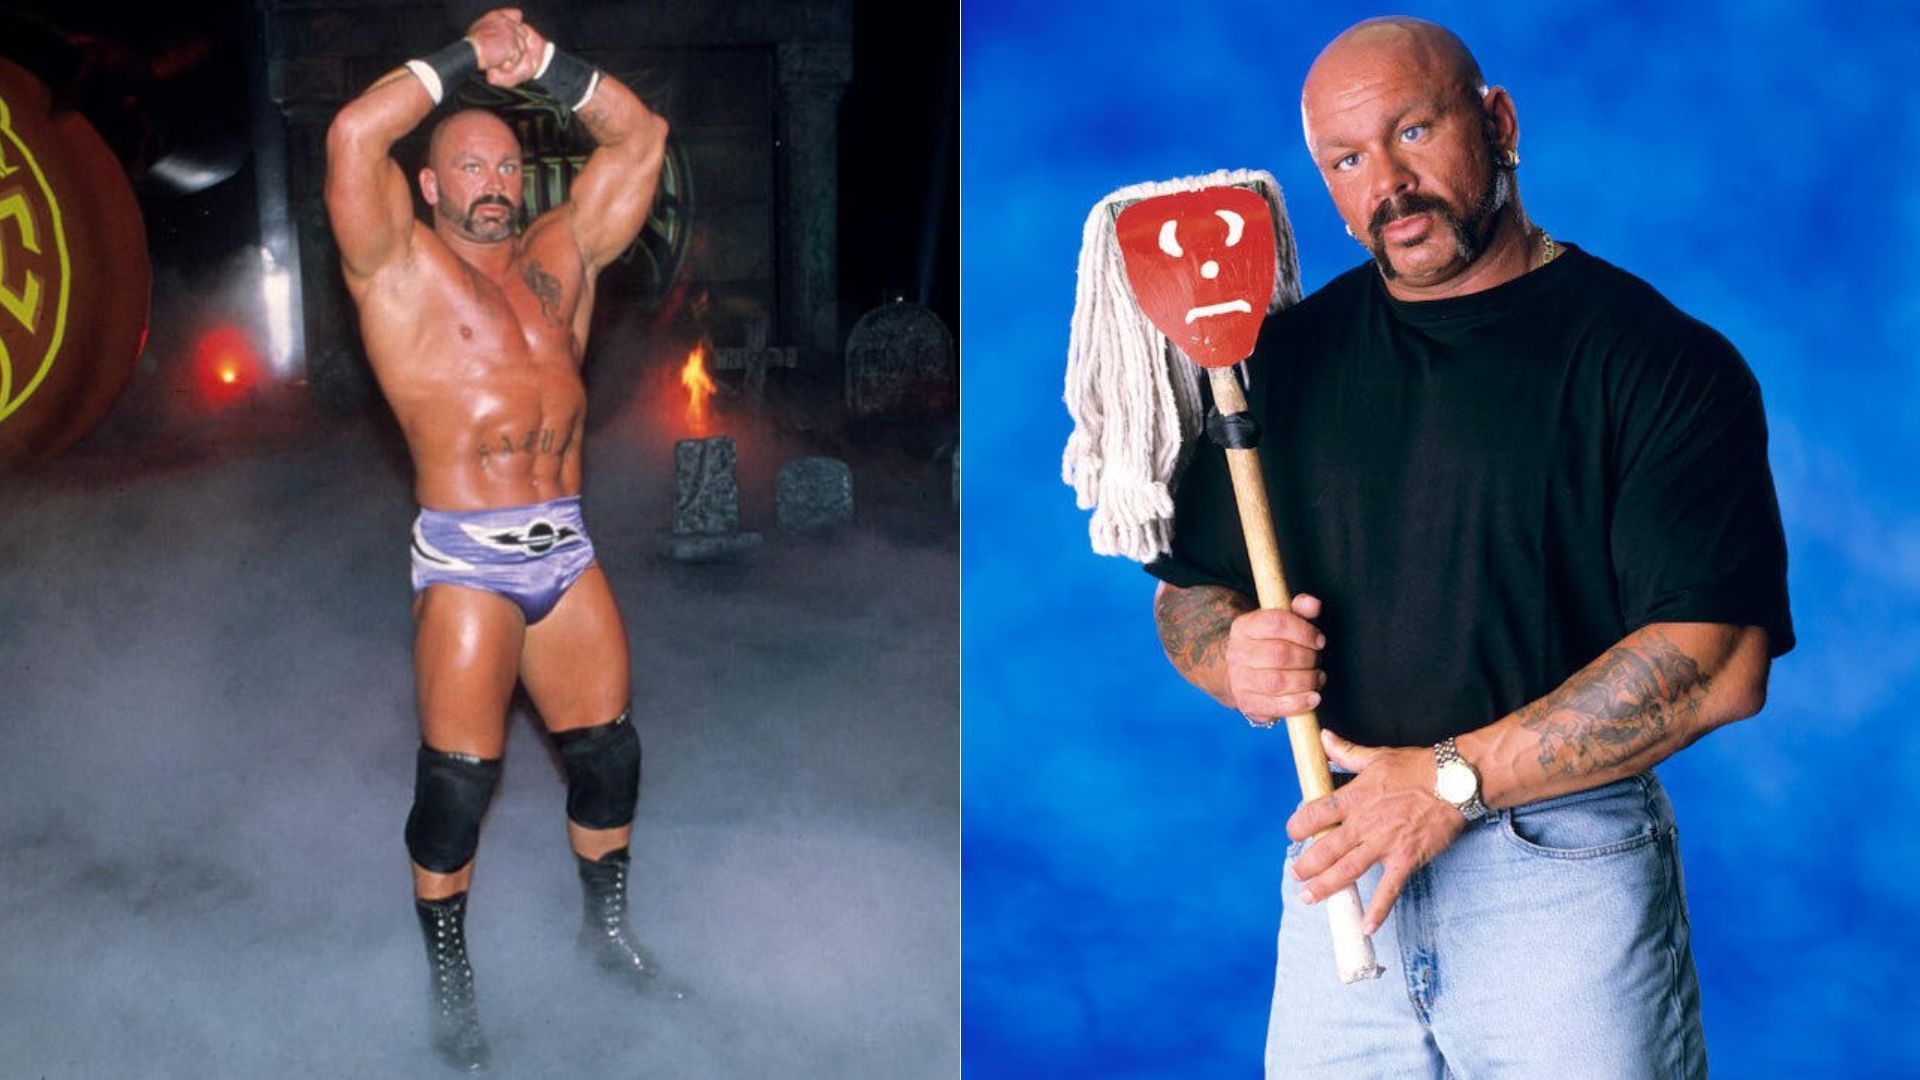 Perry Saturn is a former WWE European Champion